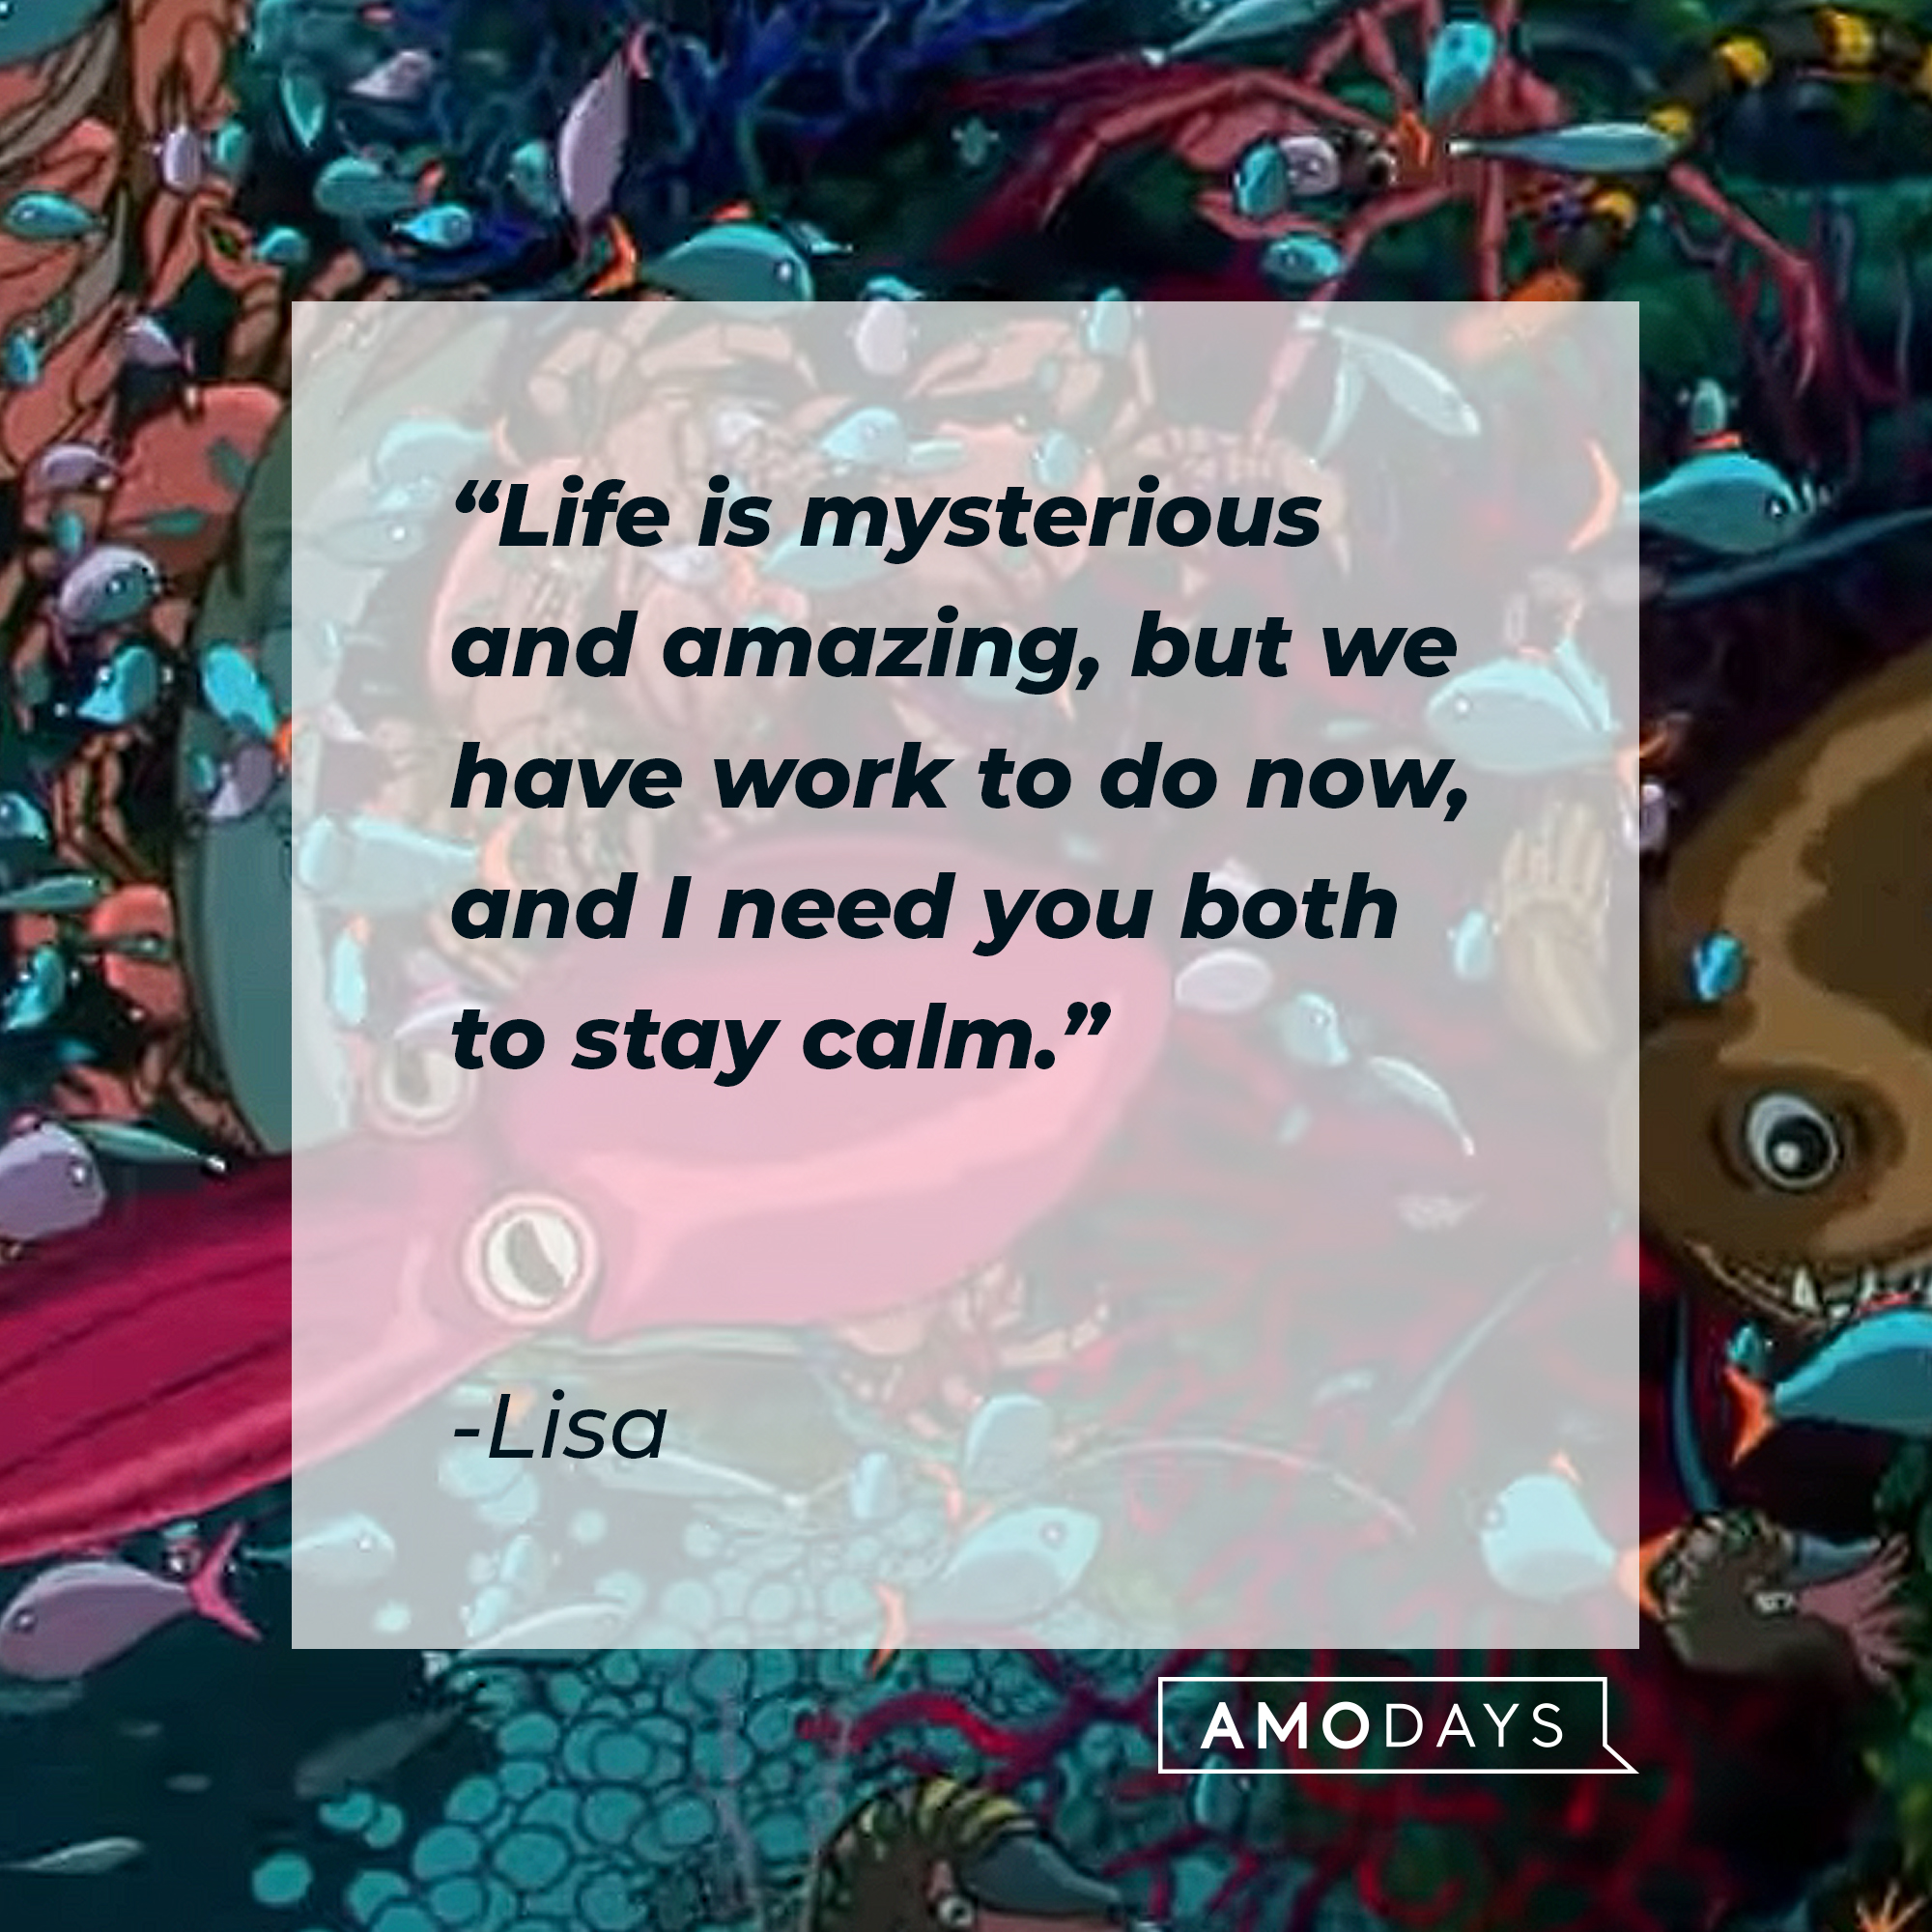 Lisa's quote: "Life is mysterious and amazing, but we have work to do now, and I need you both to stay calm." | Source: Youtube.com/crunchyrollstoreau